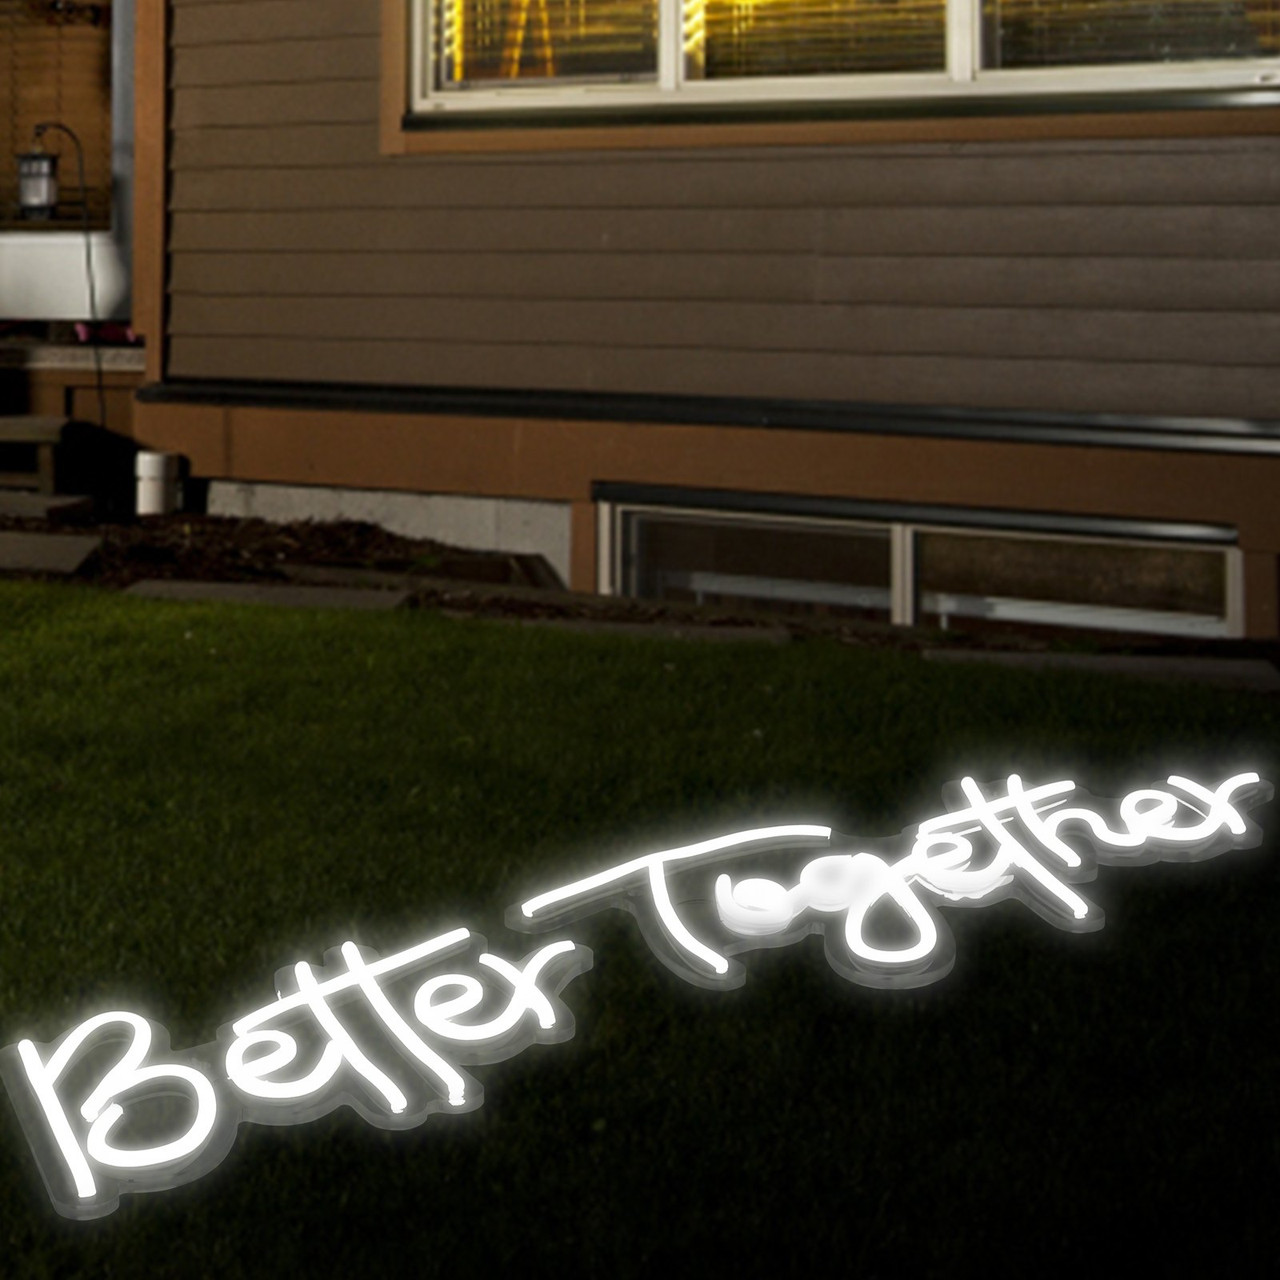 VEVOR Better Together Neon Sign, 24" x 10" + 17" x 9" White LED lights Sign, Adjustable Brightness with Dimmer Switch and 12V Power Adapter, Used for Home, Party, Wedding, and Bar Decoration
